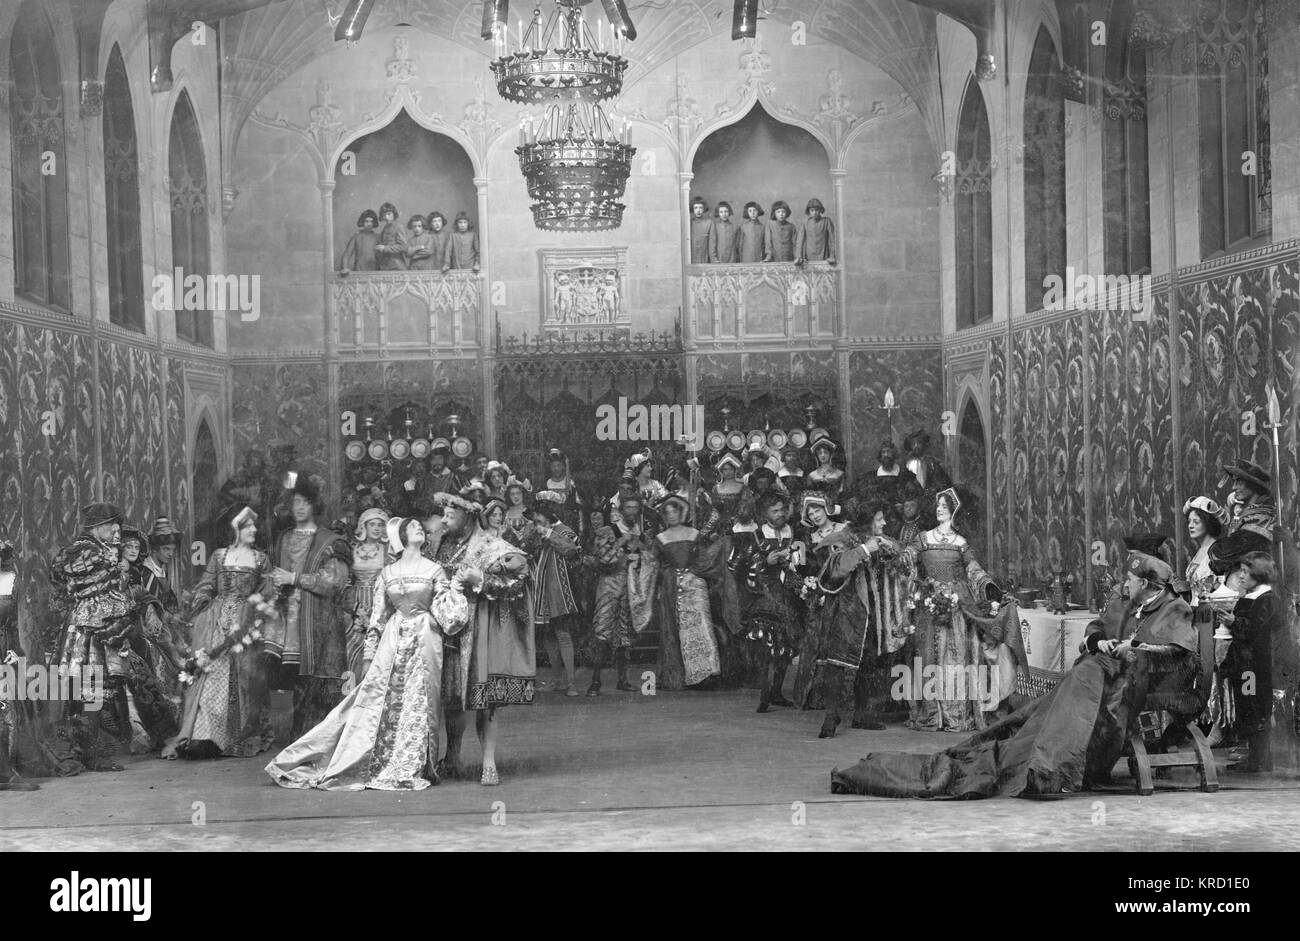 A scene from Shakespeare's play, Henry VIII, in a production by Herbert Beerbohm Tree at His Majesty's Theatre, London.  The production opened in 1910, was revived for the London Shakespeare Festival in 1911, and was repeated again in 1912.  Tree played Cardinal Wolsey.  Other actors were Violet Vanbrugh (Queen Katherine), Arthur Bourchier (King Henry) and Laura Cowie (Anne Bullen).  This scene shows Henry and Anne in conversation, with the rest of the court looking on and gossipping.  Wolsey sits in a chair on the far right.   (1 of 6)       Date: circa 1910-1912 Stock Photo